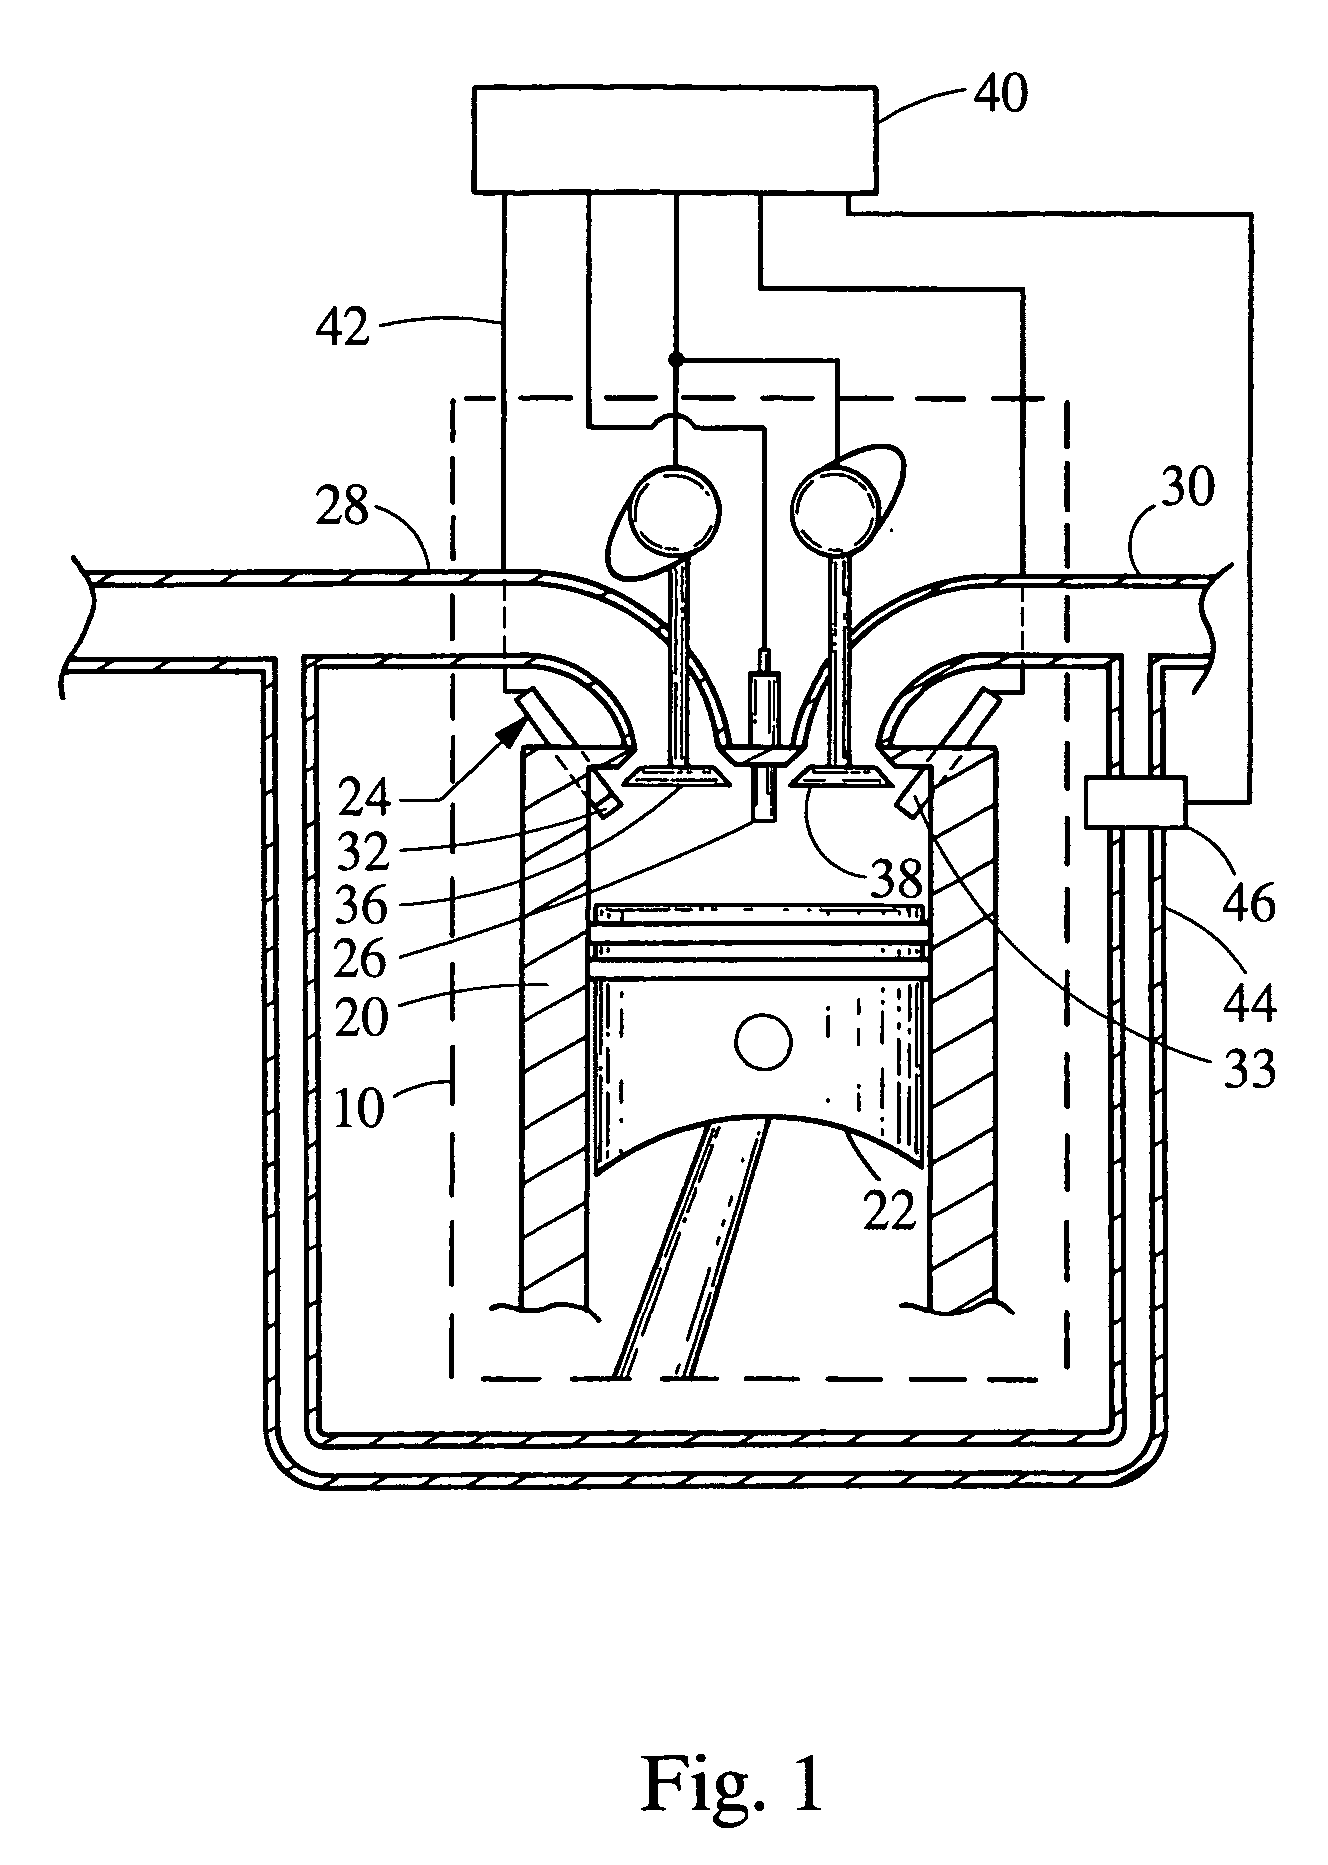 Method of controlling diesel engine combustion process in a closed loop using ionization feedback